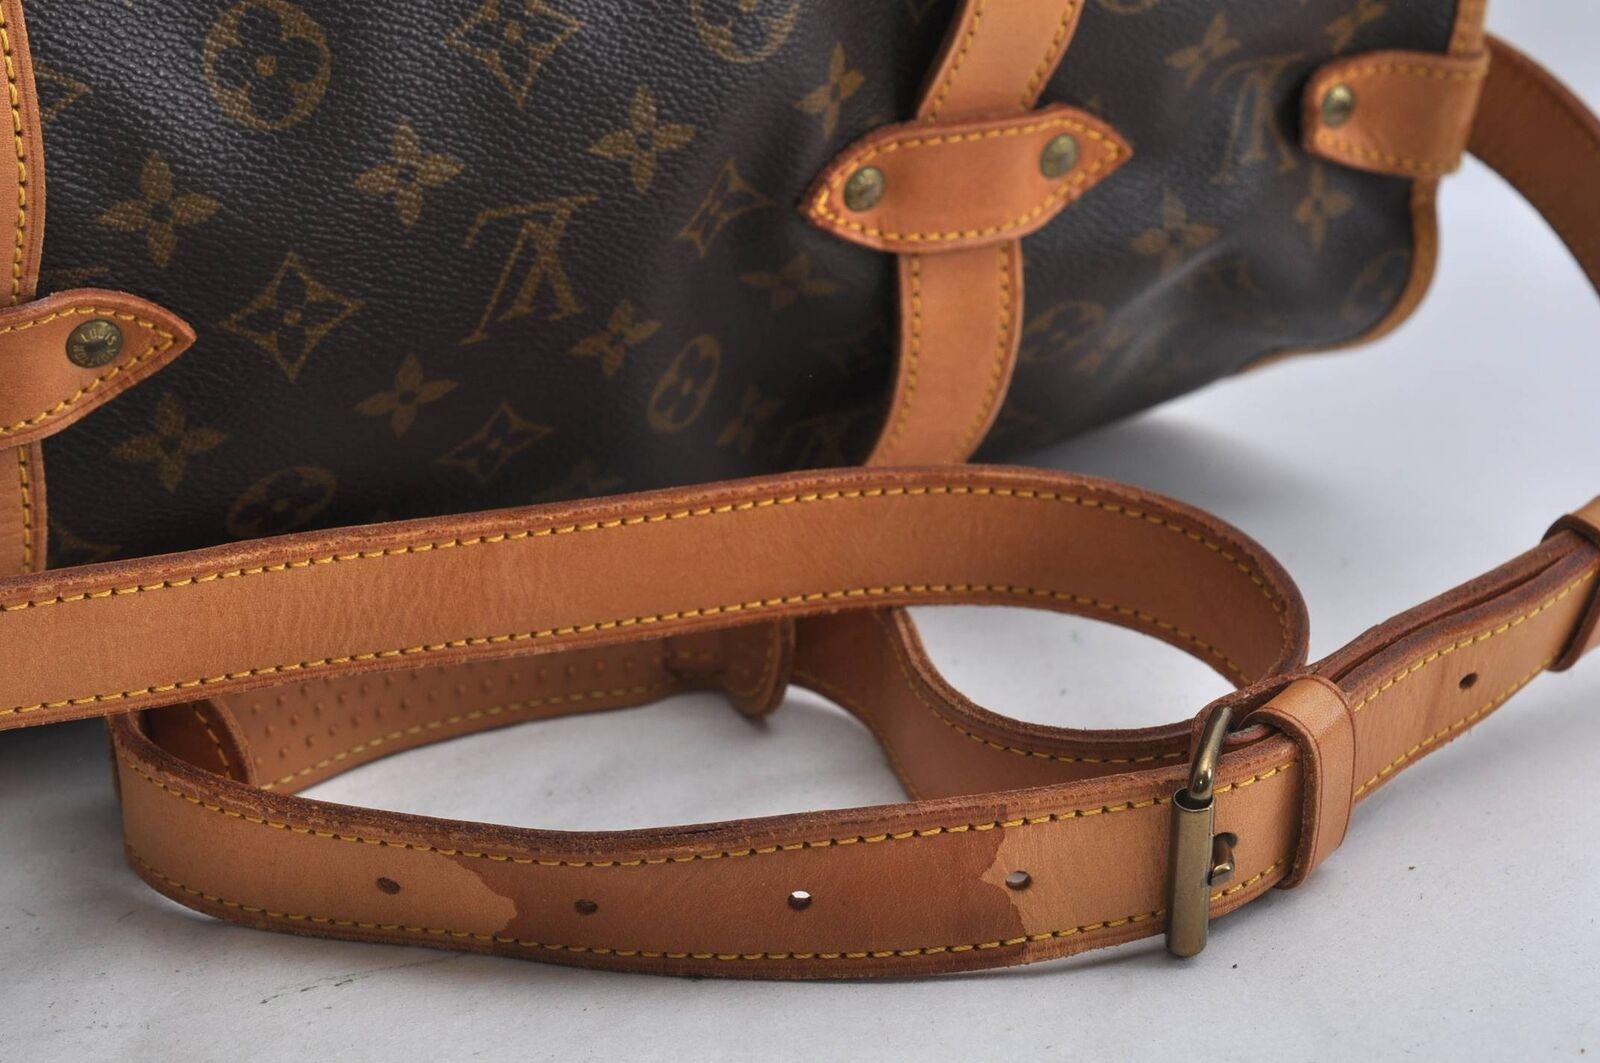 Louis Vuitton Saumur 43 Crossbody In Good Condition For Sale In Bellevue, WA